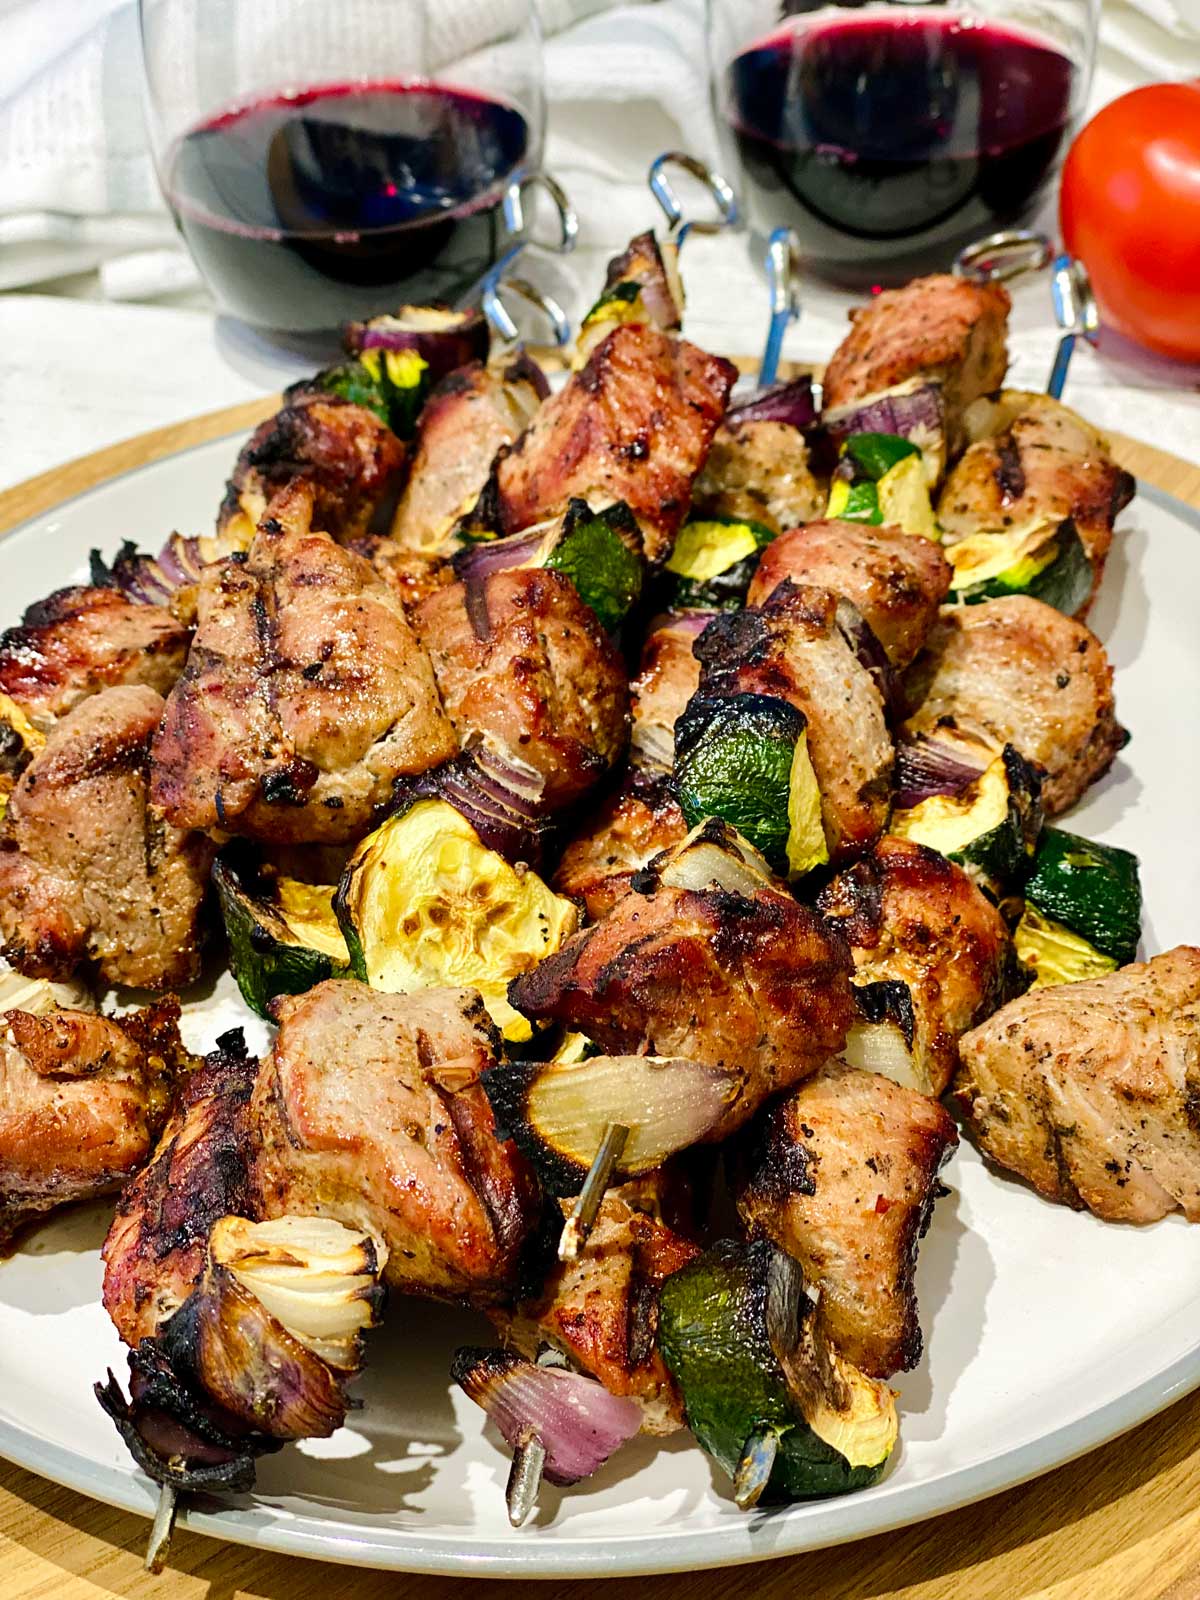 Chicken skewers baked in the oven on a white plate over a wooden finished plate